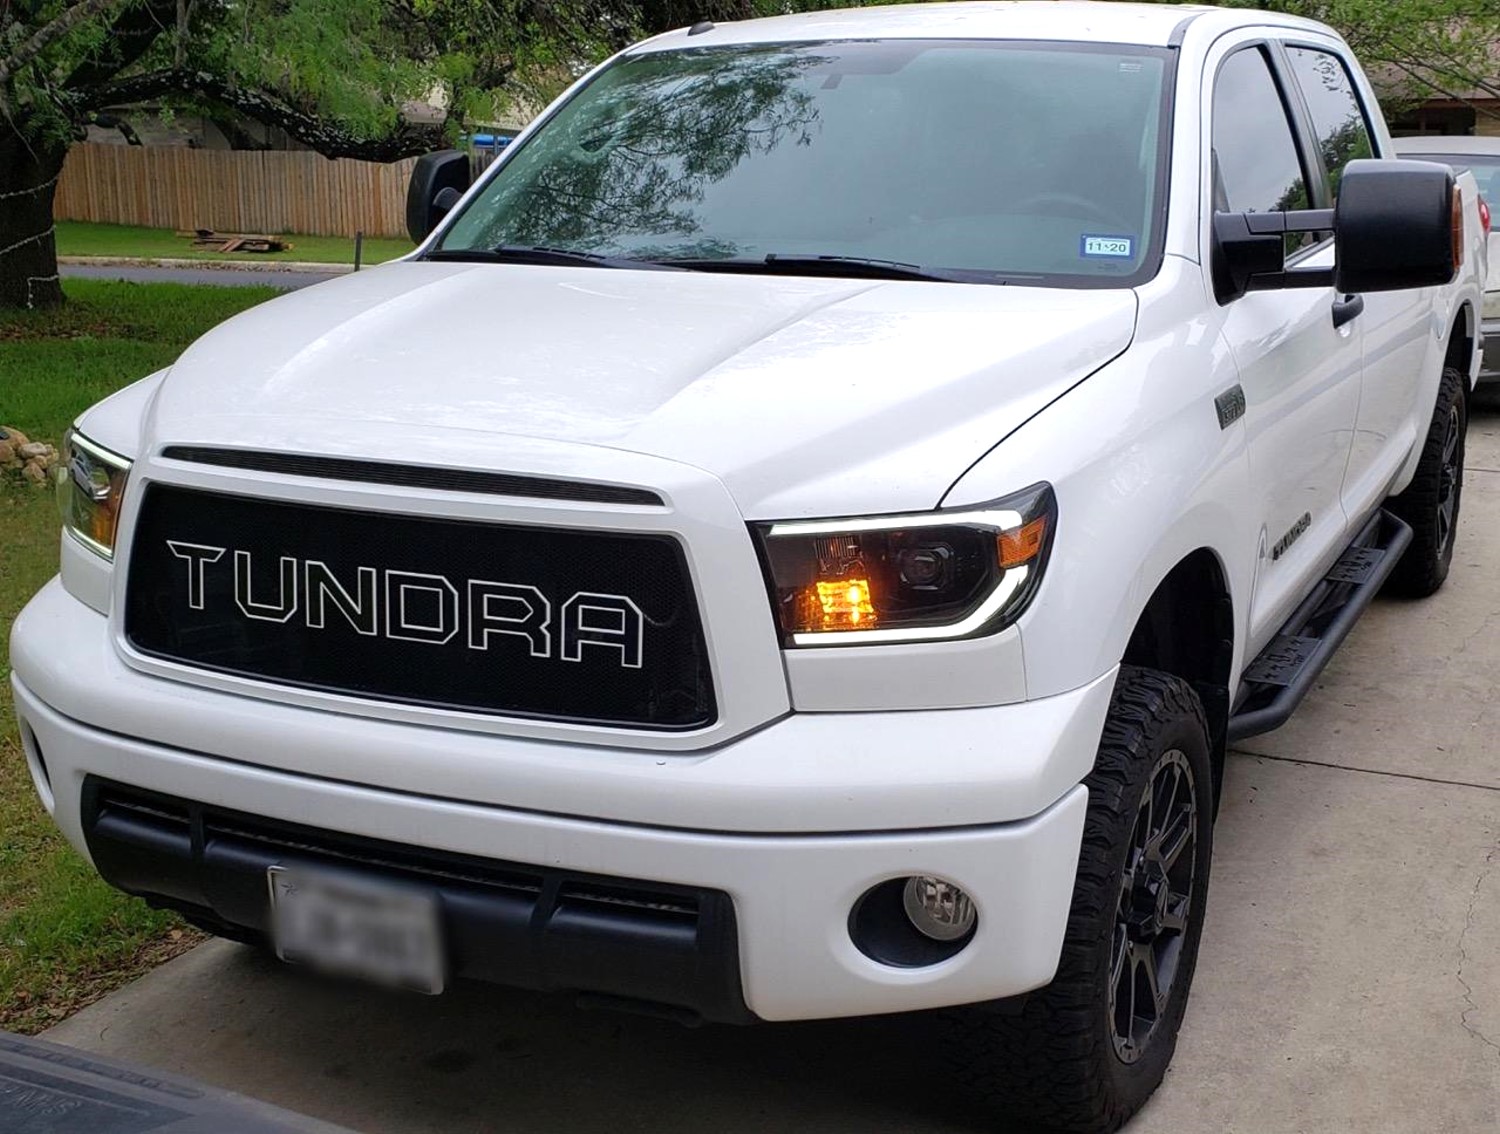 2010-13 Toyota Tundra Grill Mesh with Big Letters #5